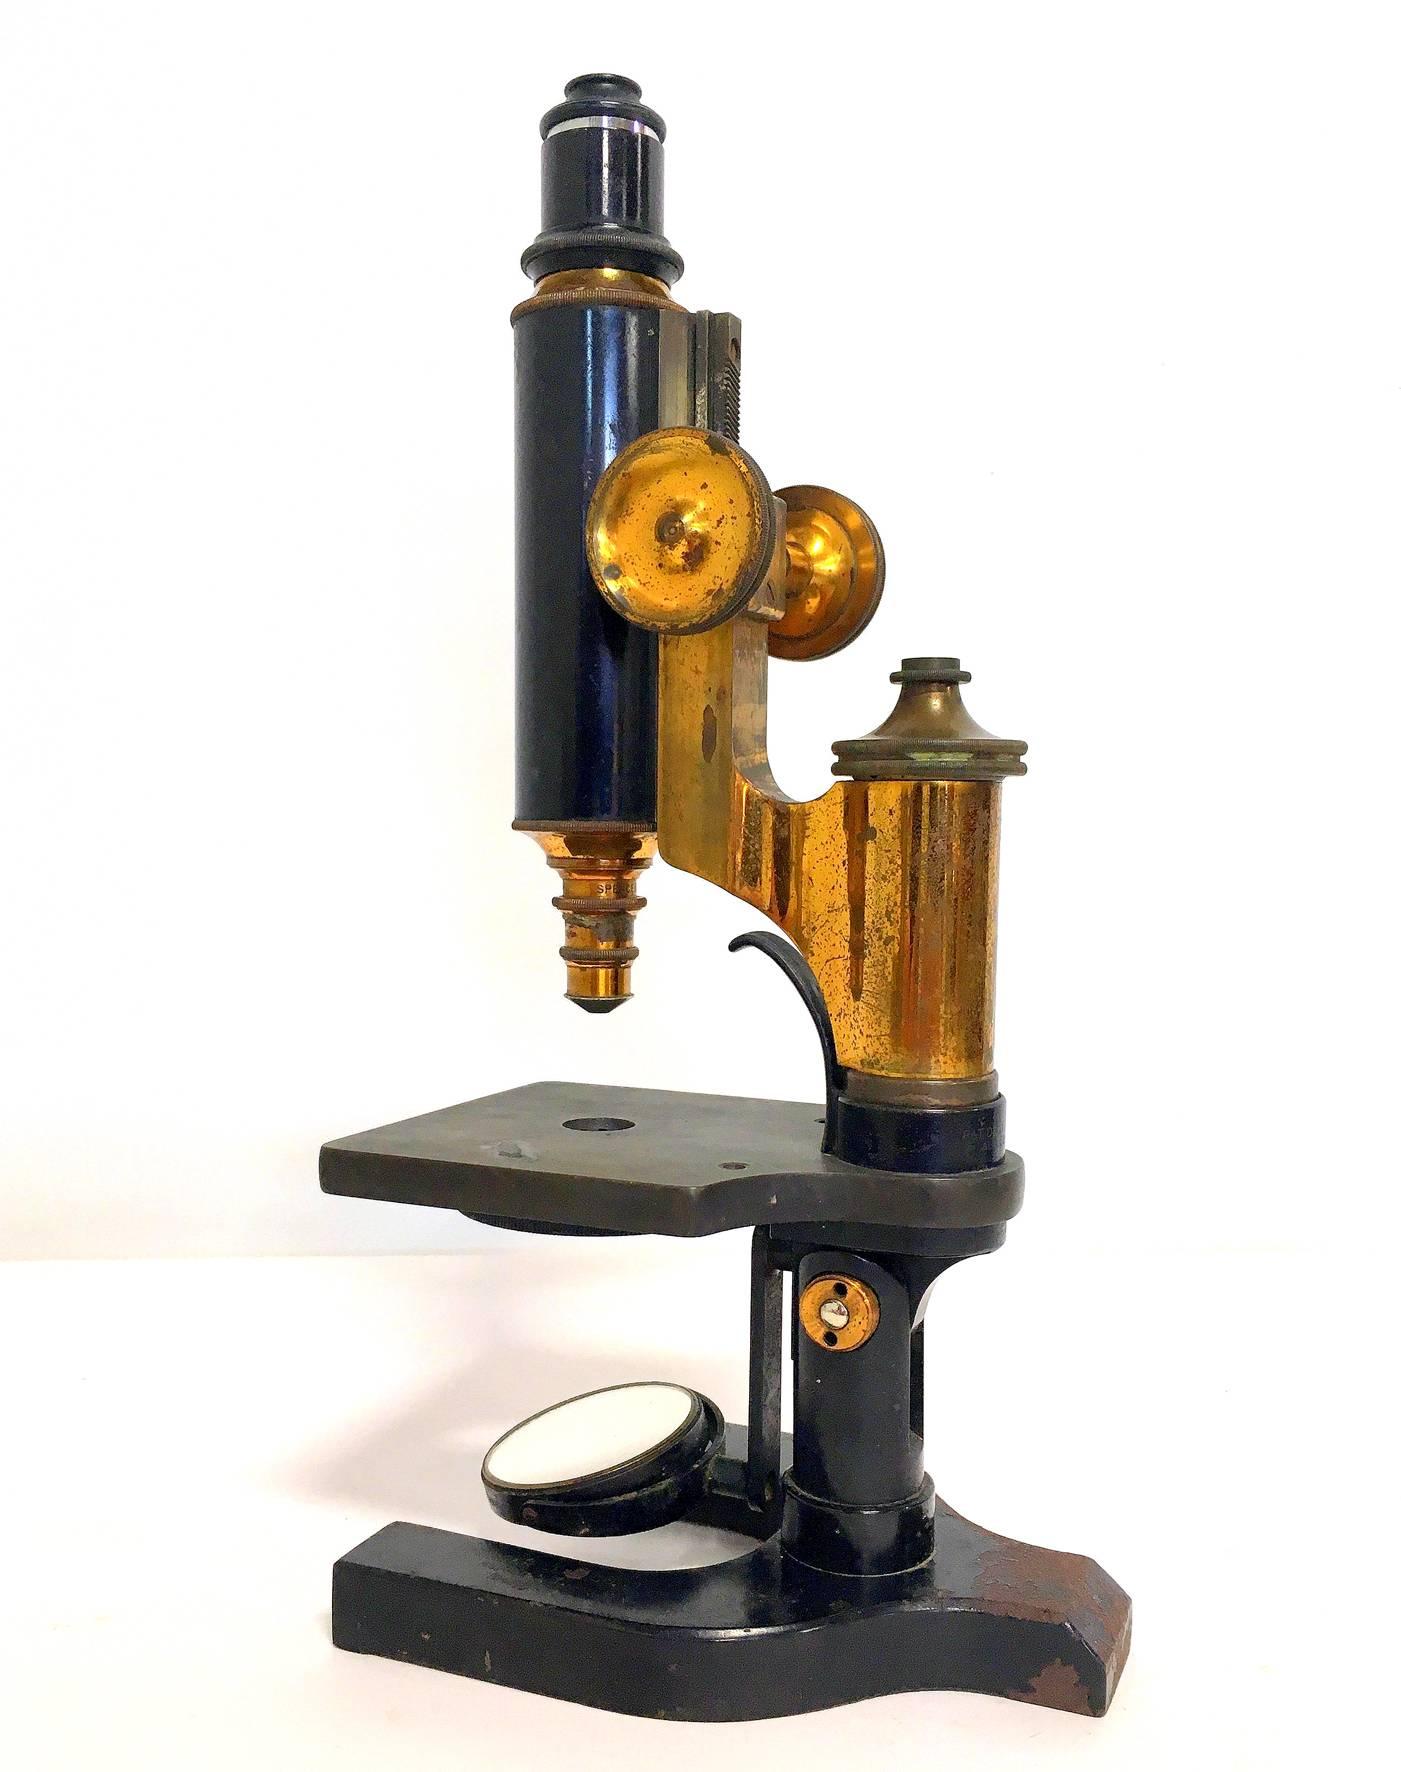 A brass and iron microscope by Spencer of buffalo, New York. circa late 19th century. This microscope is in very good working condition, the brass dials on each side easily glide the sight piece and the round mirror swivels in several directions.